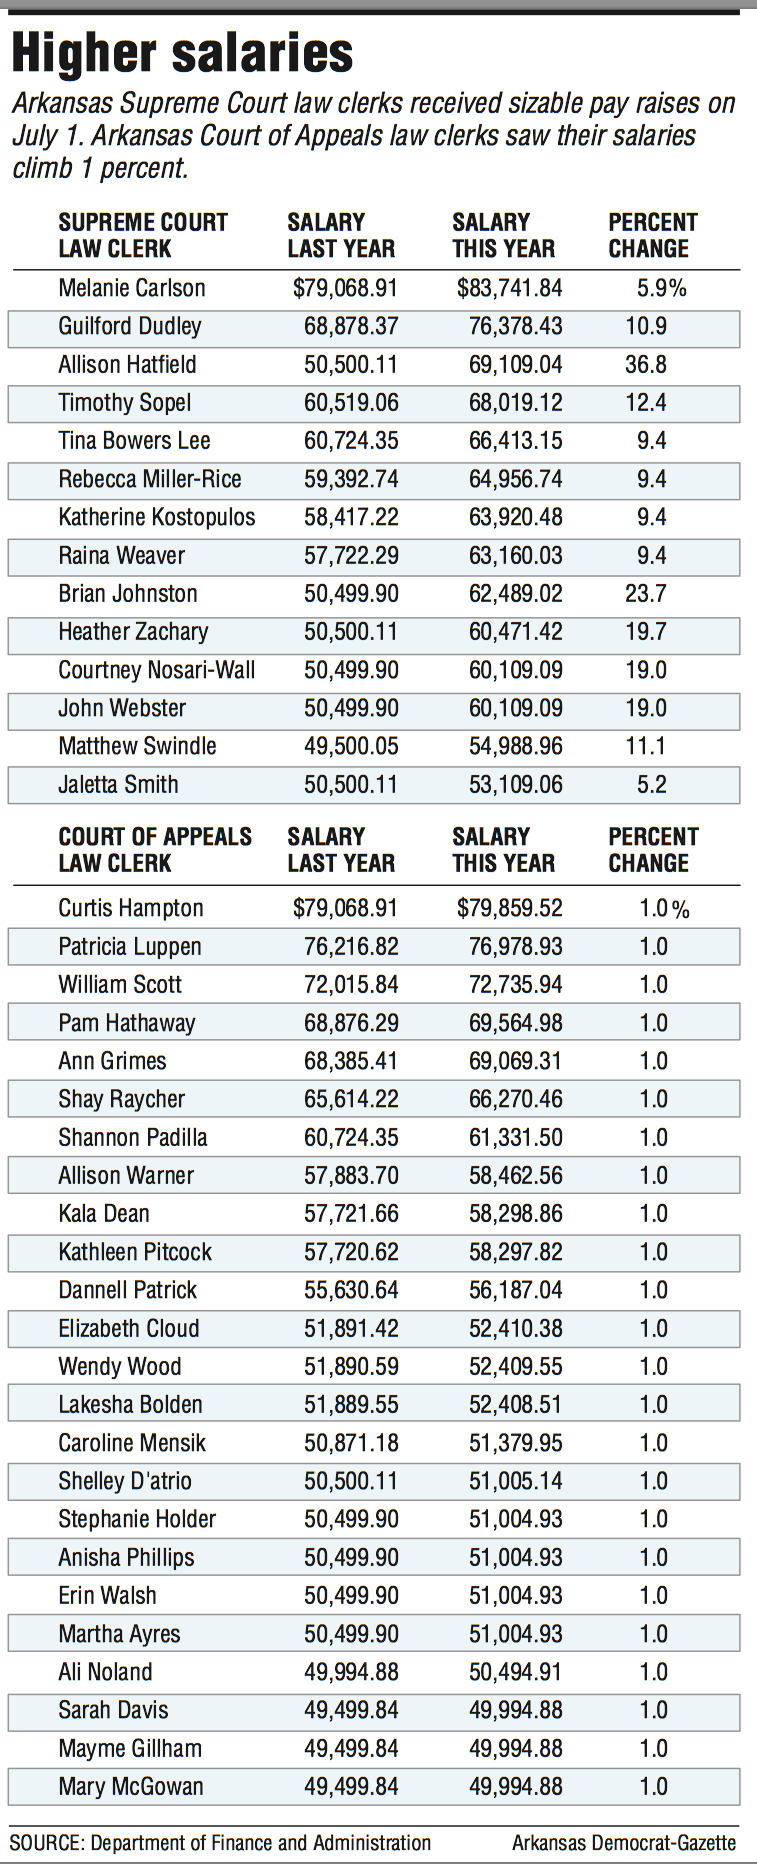 Listing of higher salaries for law clerks.